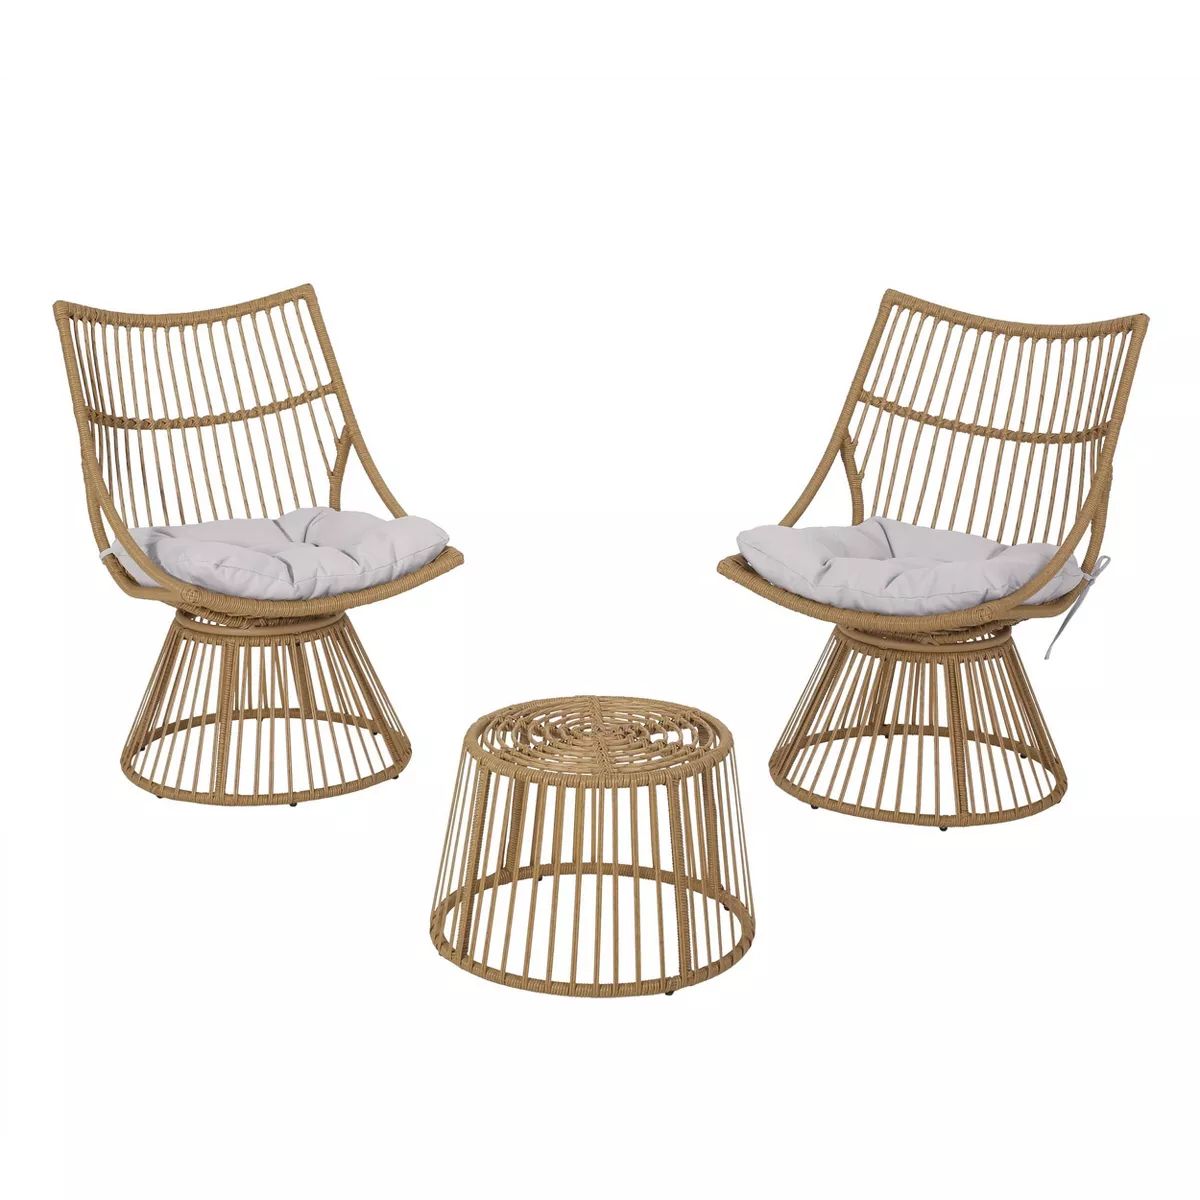 3pc Caryl Outdoor Wicker Chat Set with Cushions Light Brown/Beige - Christopher Knight Home | Target